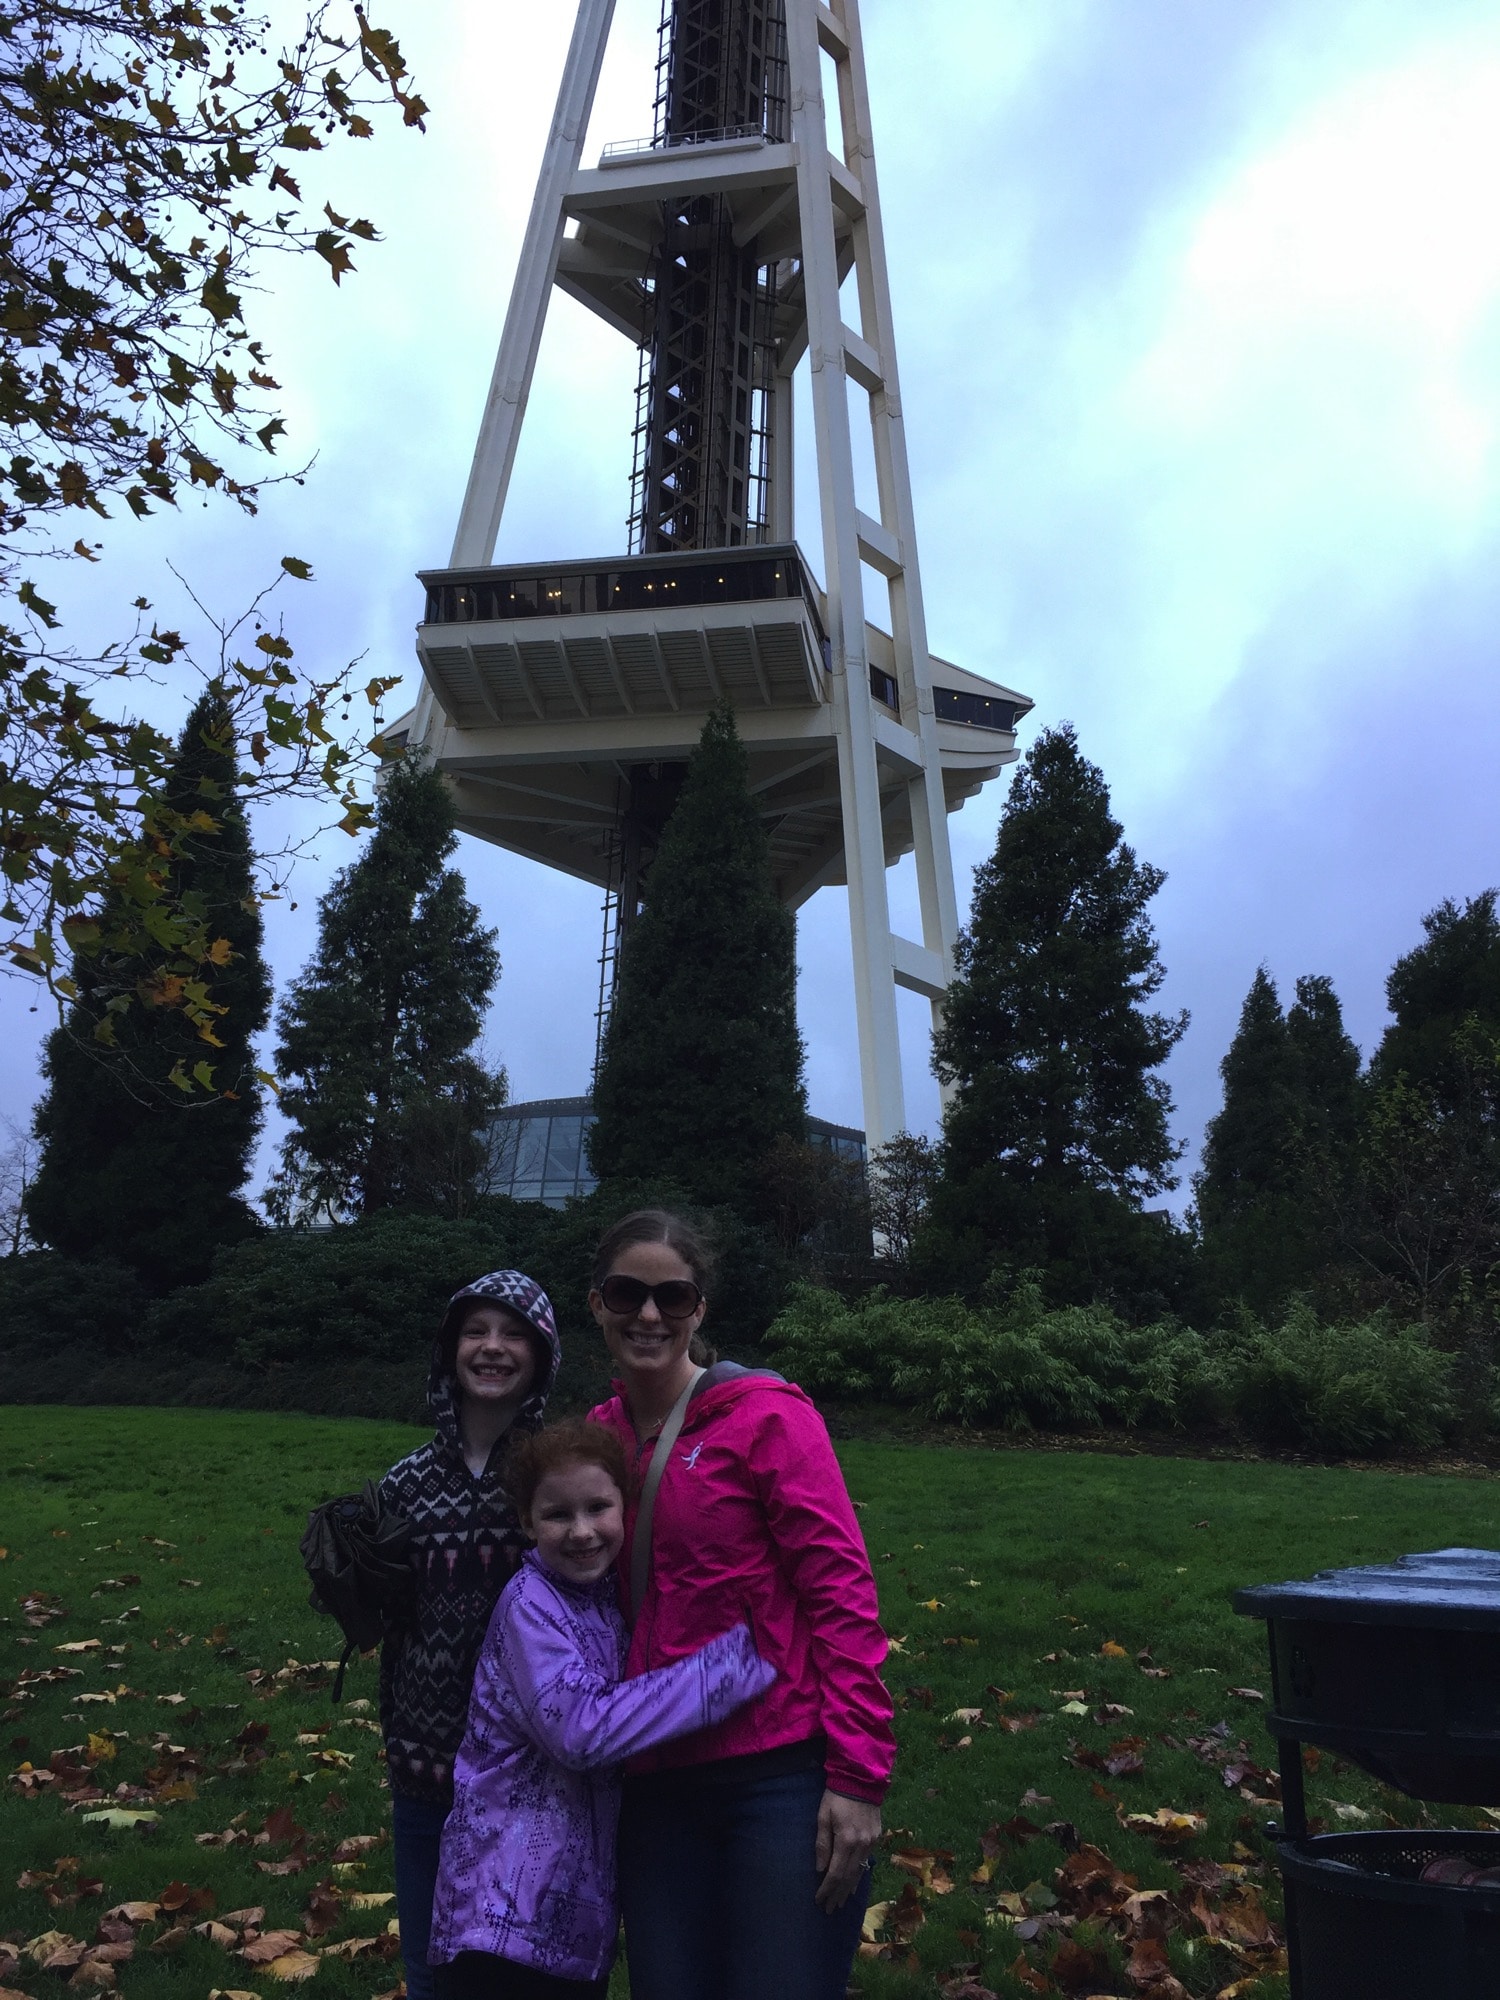 At the Space Needle